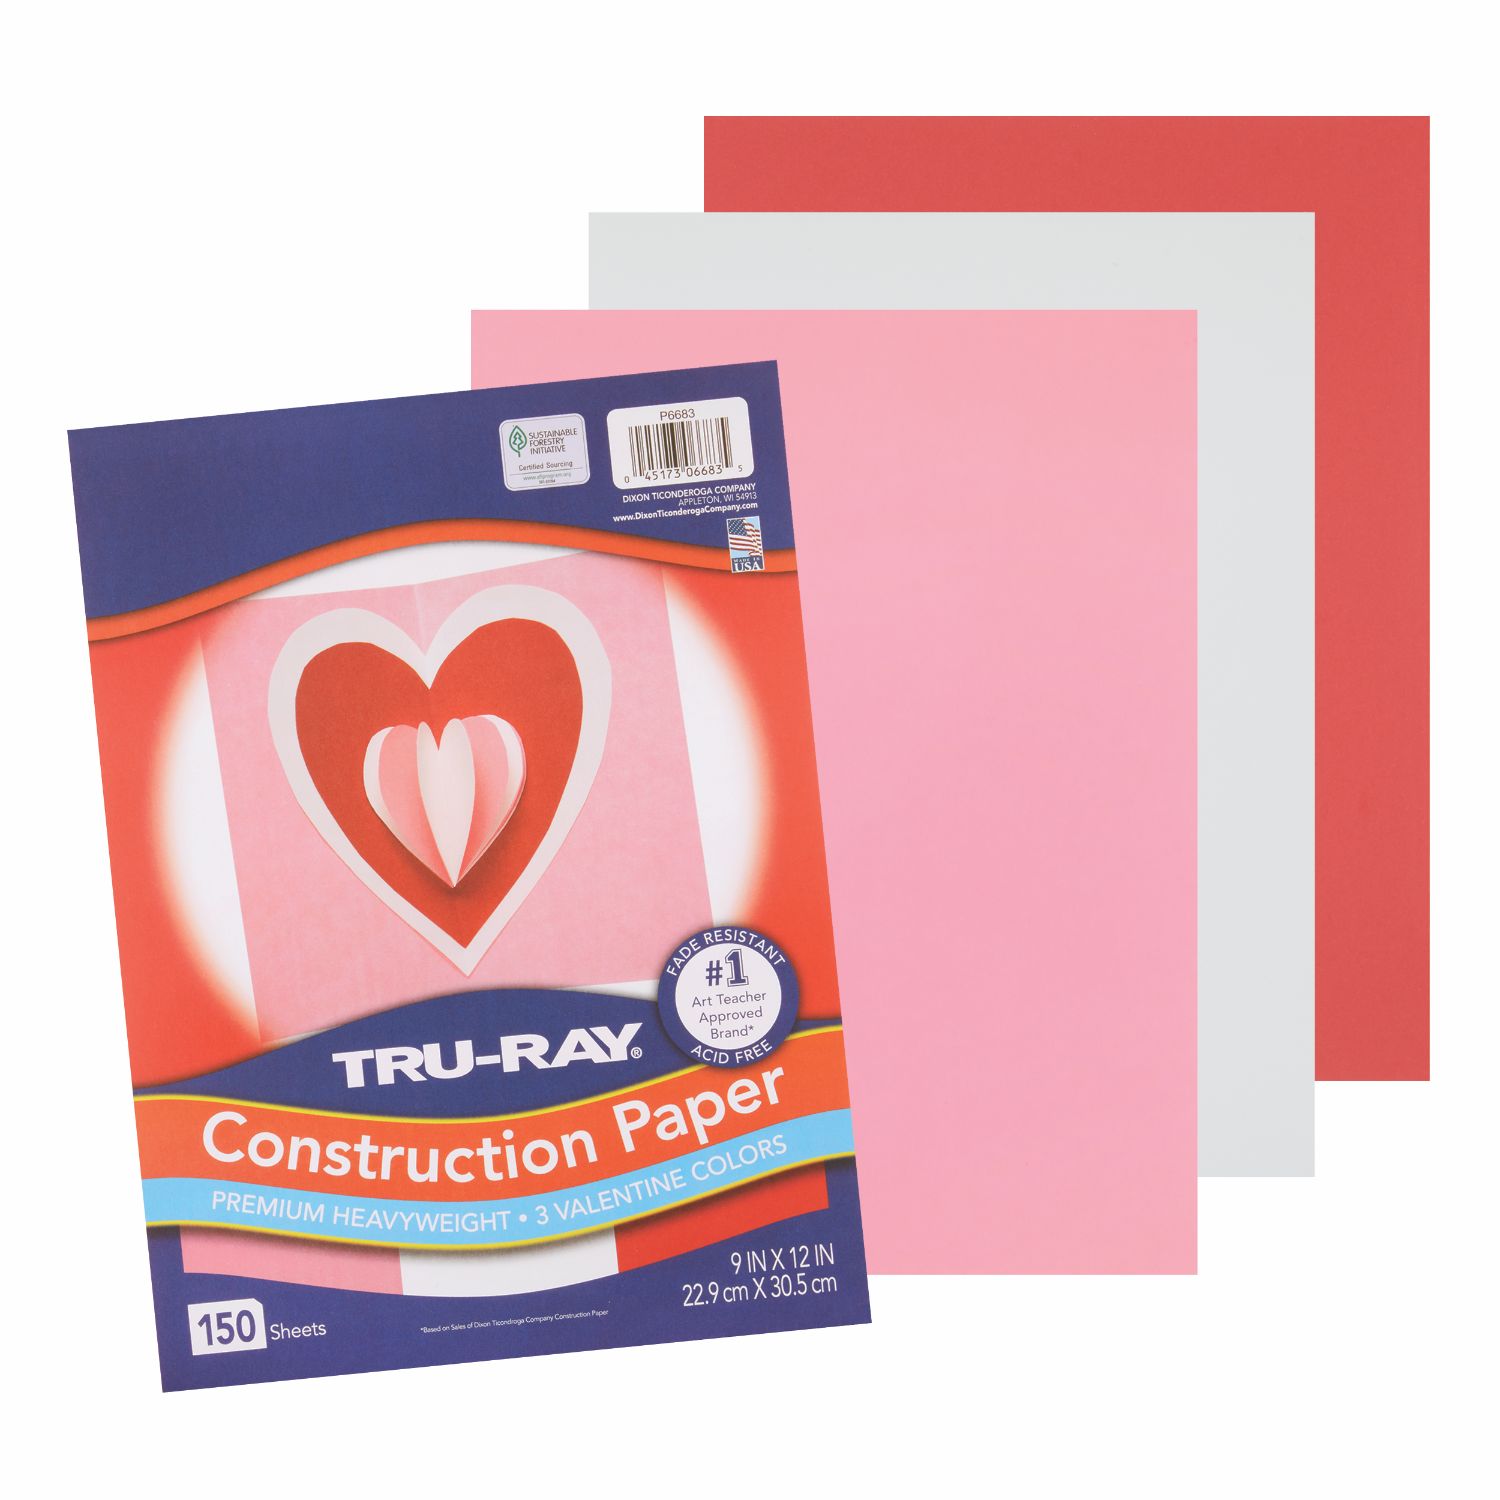 <h1 style="text-align: center;">Tru-Ray<sup>®</sup> Construction Paper in Assorted Valentine Colors</h1>